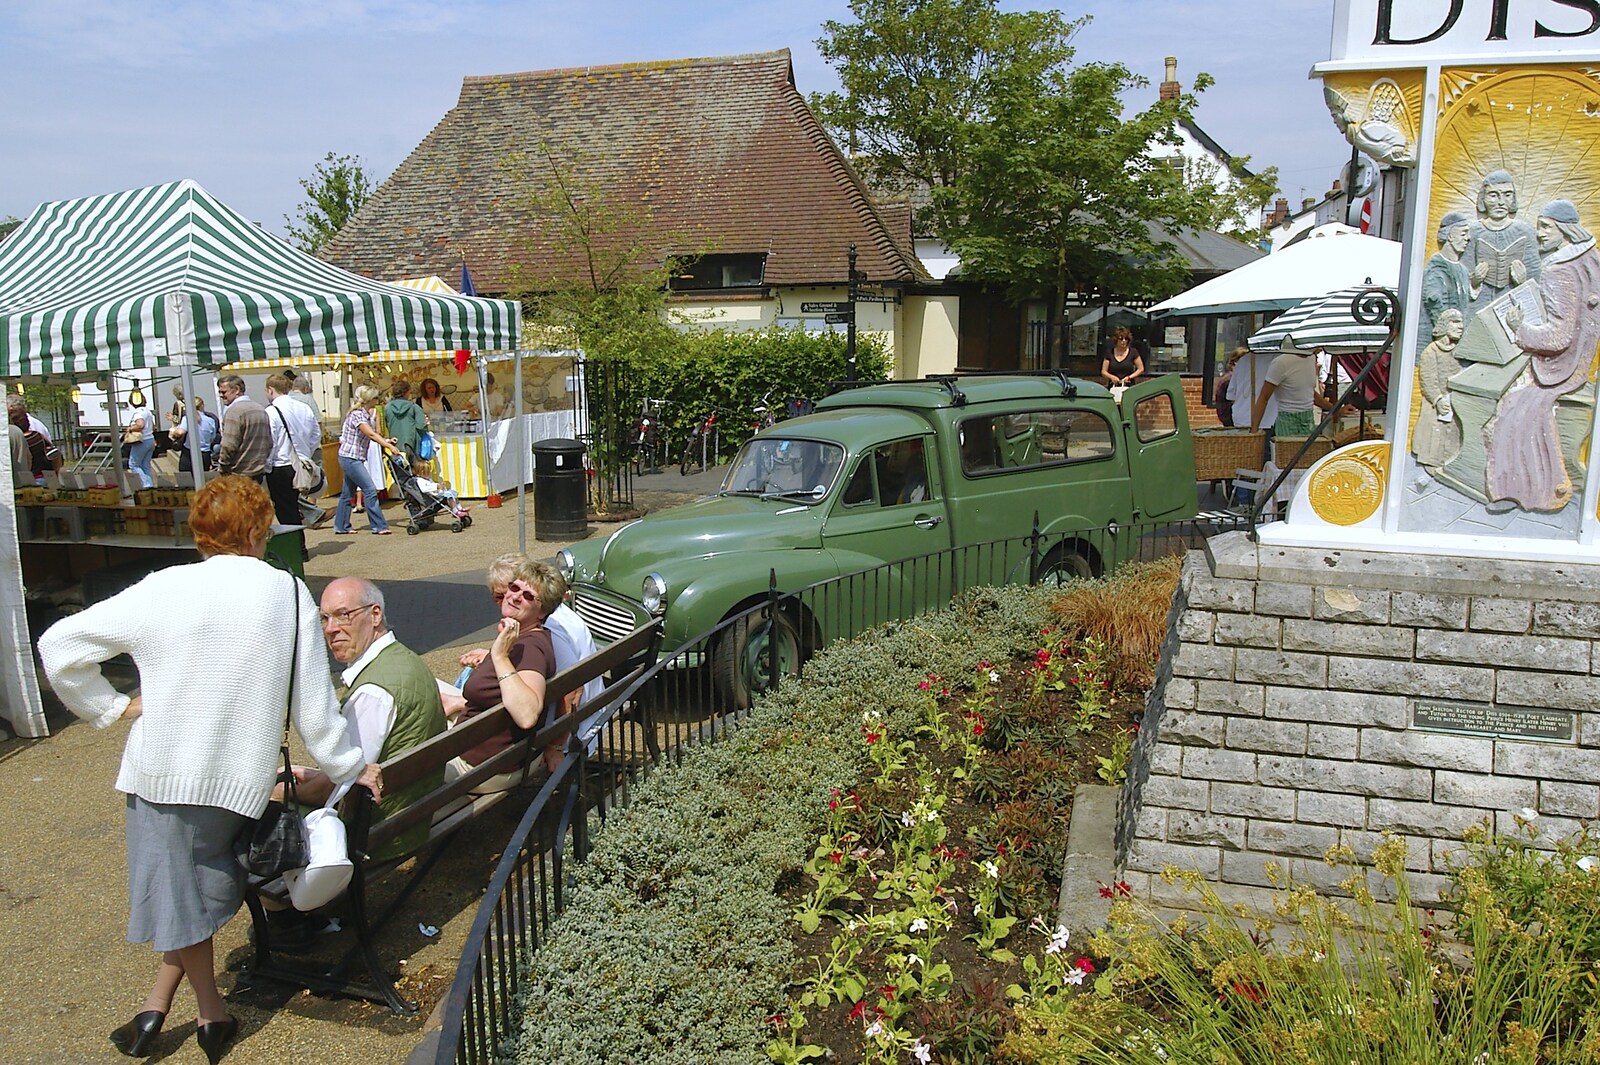 The Amandine's green Morris van from A French Market Visits, Diss, Norfolk - 24th June 2006